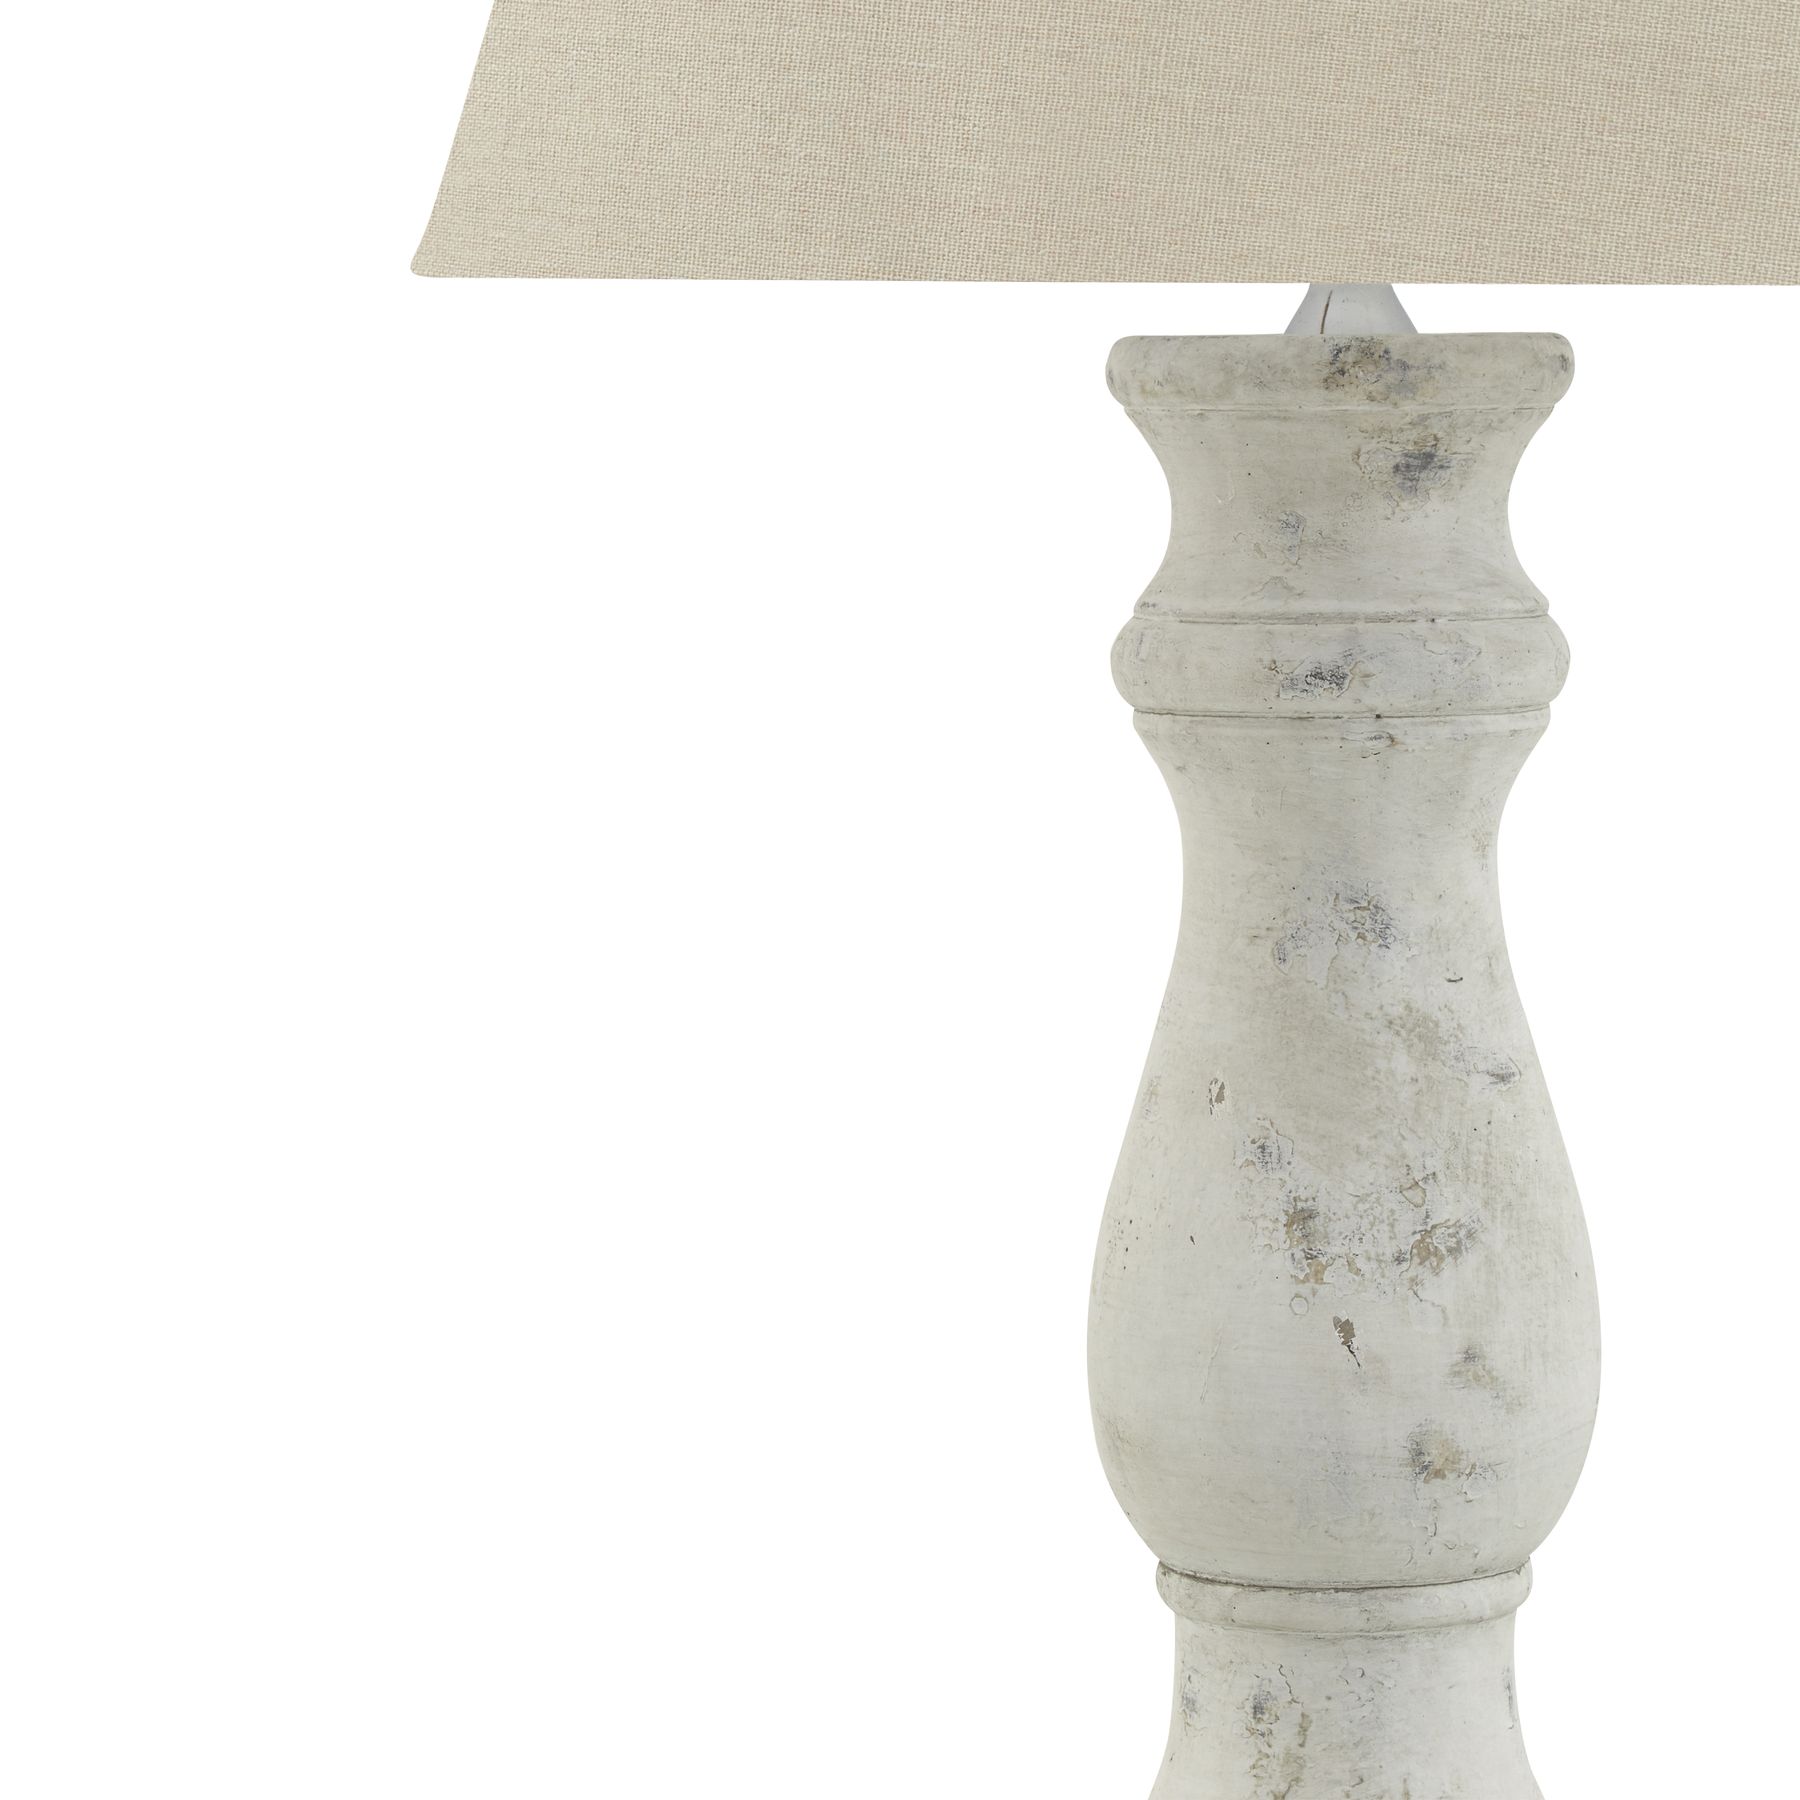 Darcy Antique White Candlestick Table Lamp With Linen Shade - Image 2